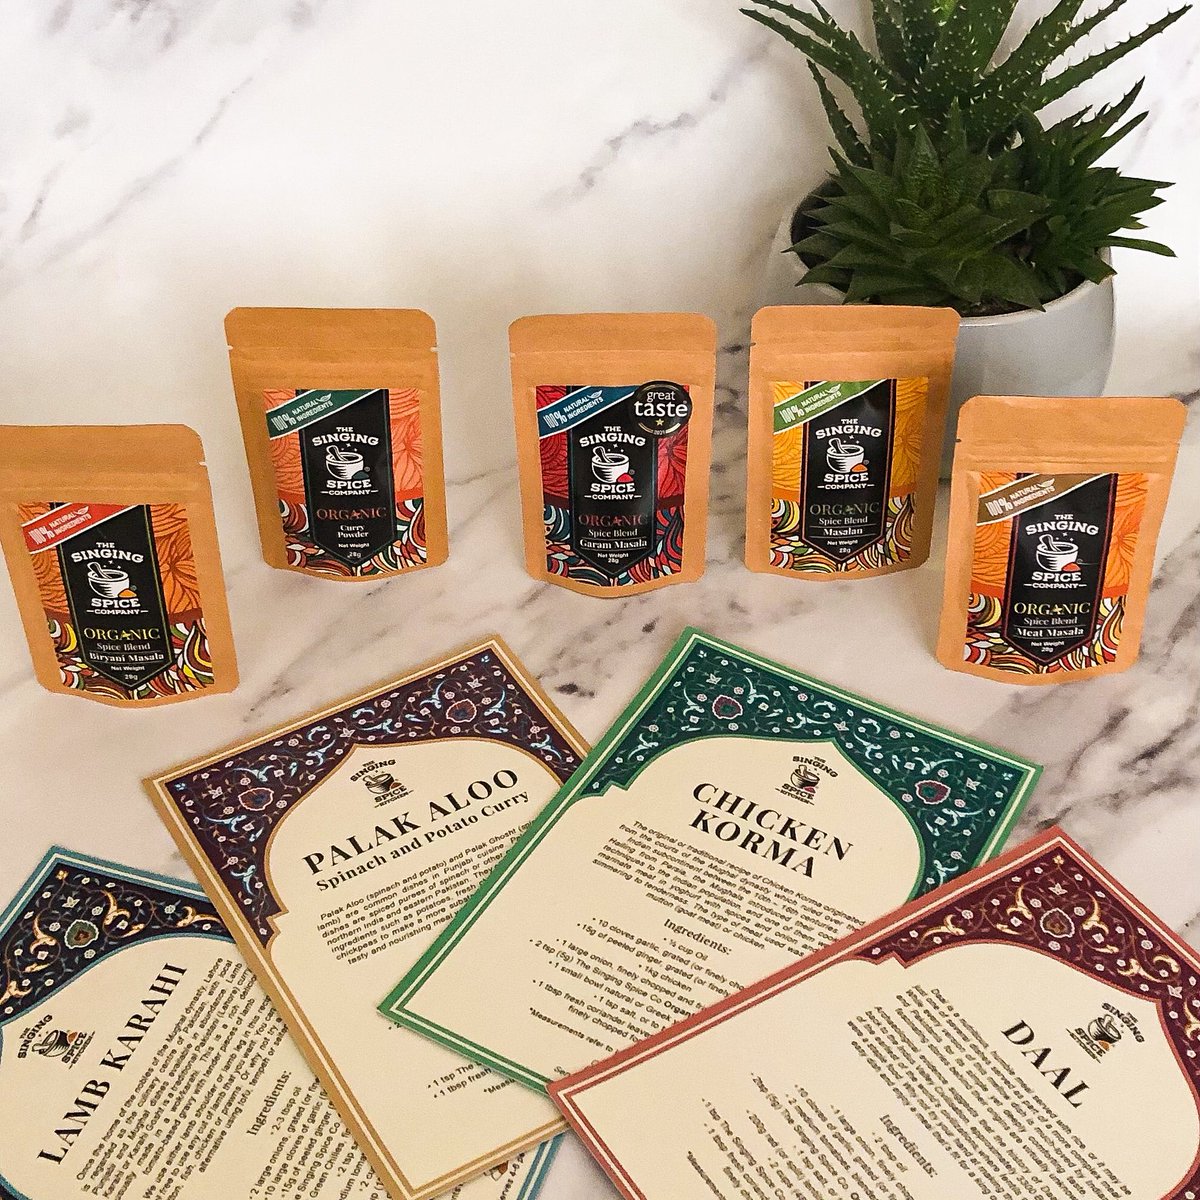 Hoping to win #sbs tomorrow. Head over to @TheoPaphitis to wish me good luck! 🤞🏽#SmallBusiness #smallbusinessowner #spiceblends #SupportSmallBusinesses #competitions